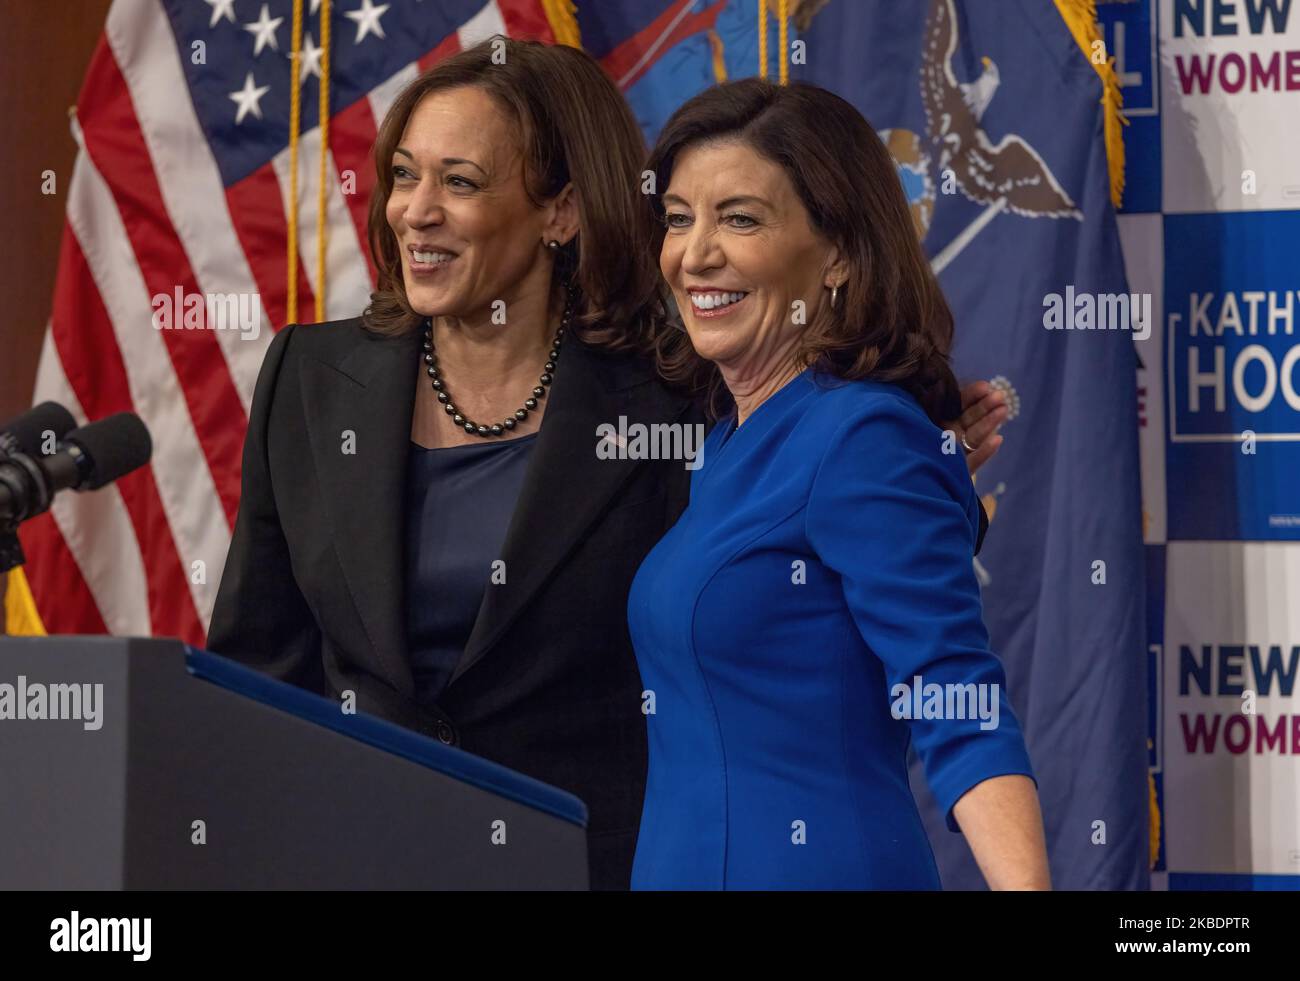 NEW YORK, N.Y. – November 3, 2022: Vice President Kamala Harris and New York Governor Kathy Hochul are seen at a campaign rally at Barnard College. Stock Photo